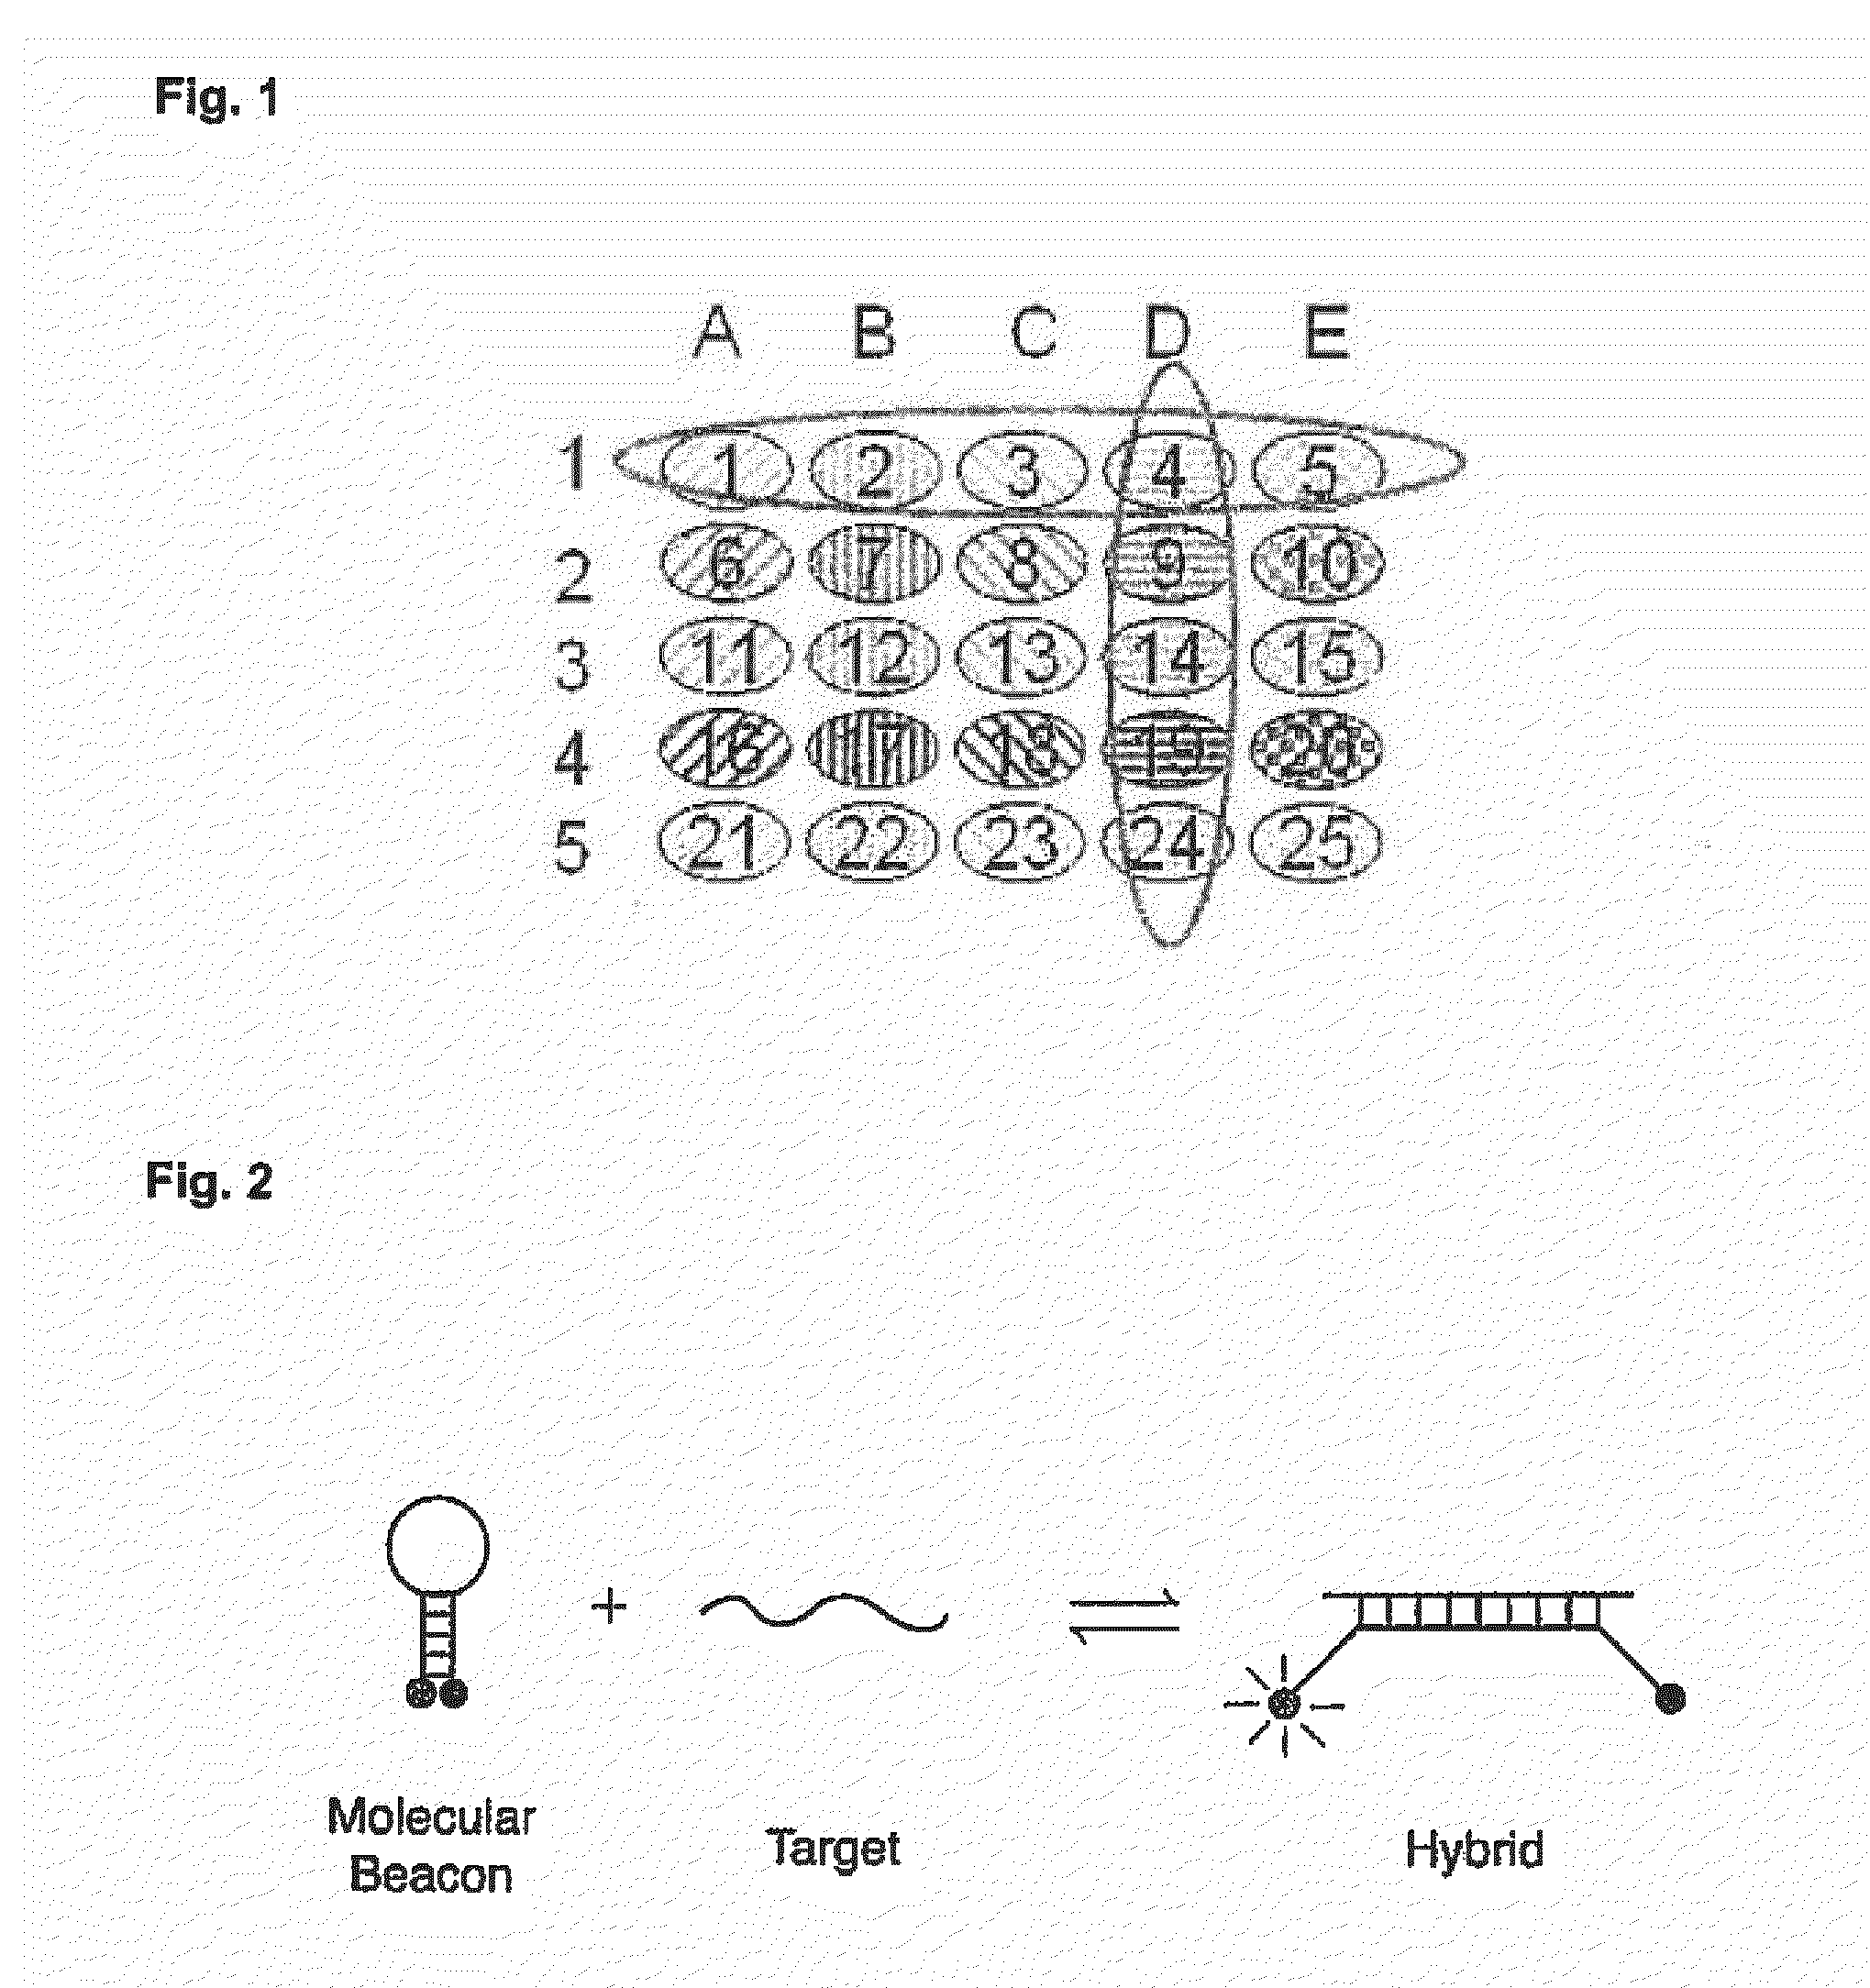 Simultaneous detection of multiple nucleic acid sequences in a reaction